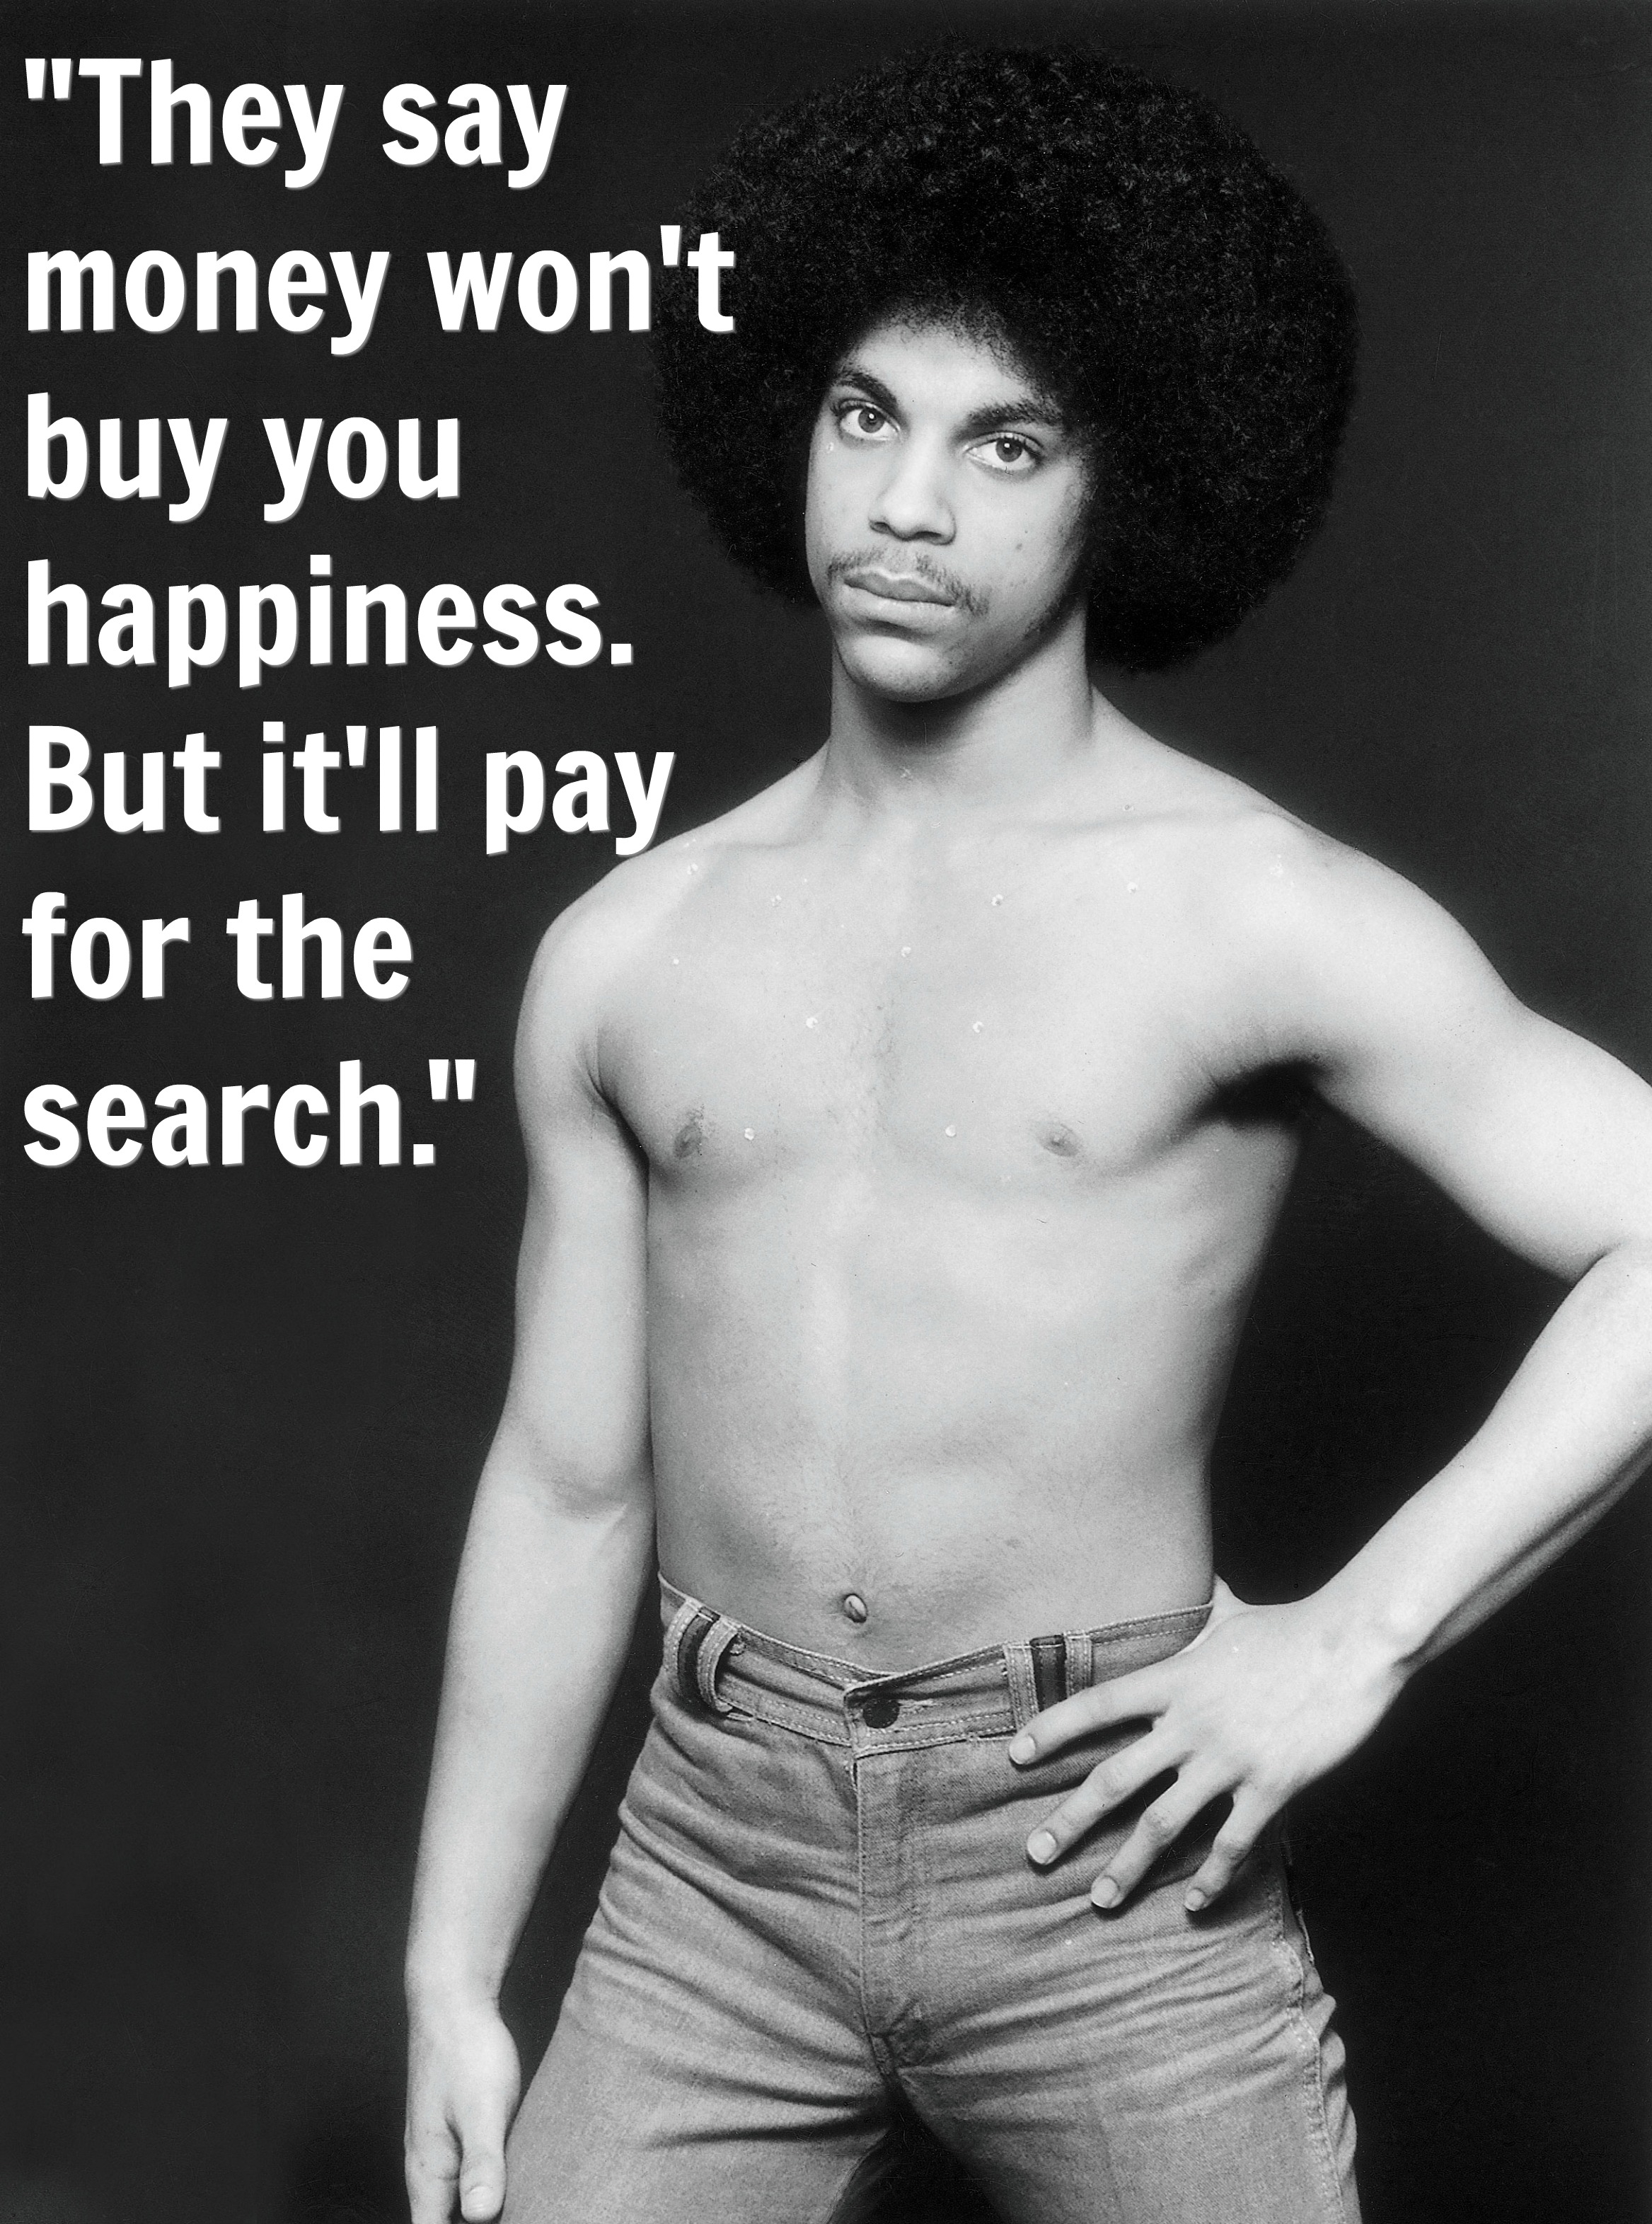 Prince quotes that give you life. They say money won't buy you happiness. But it'll pay for the search.